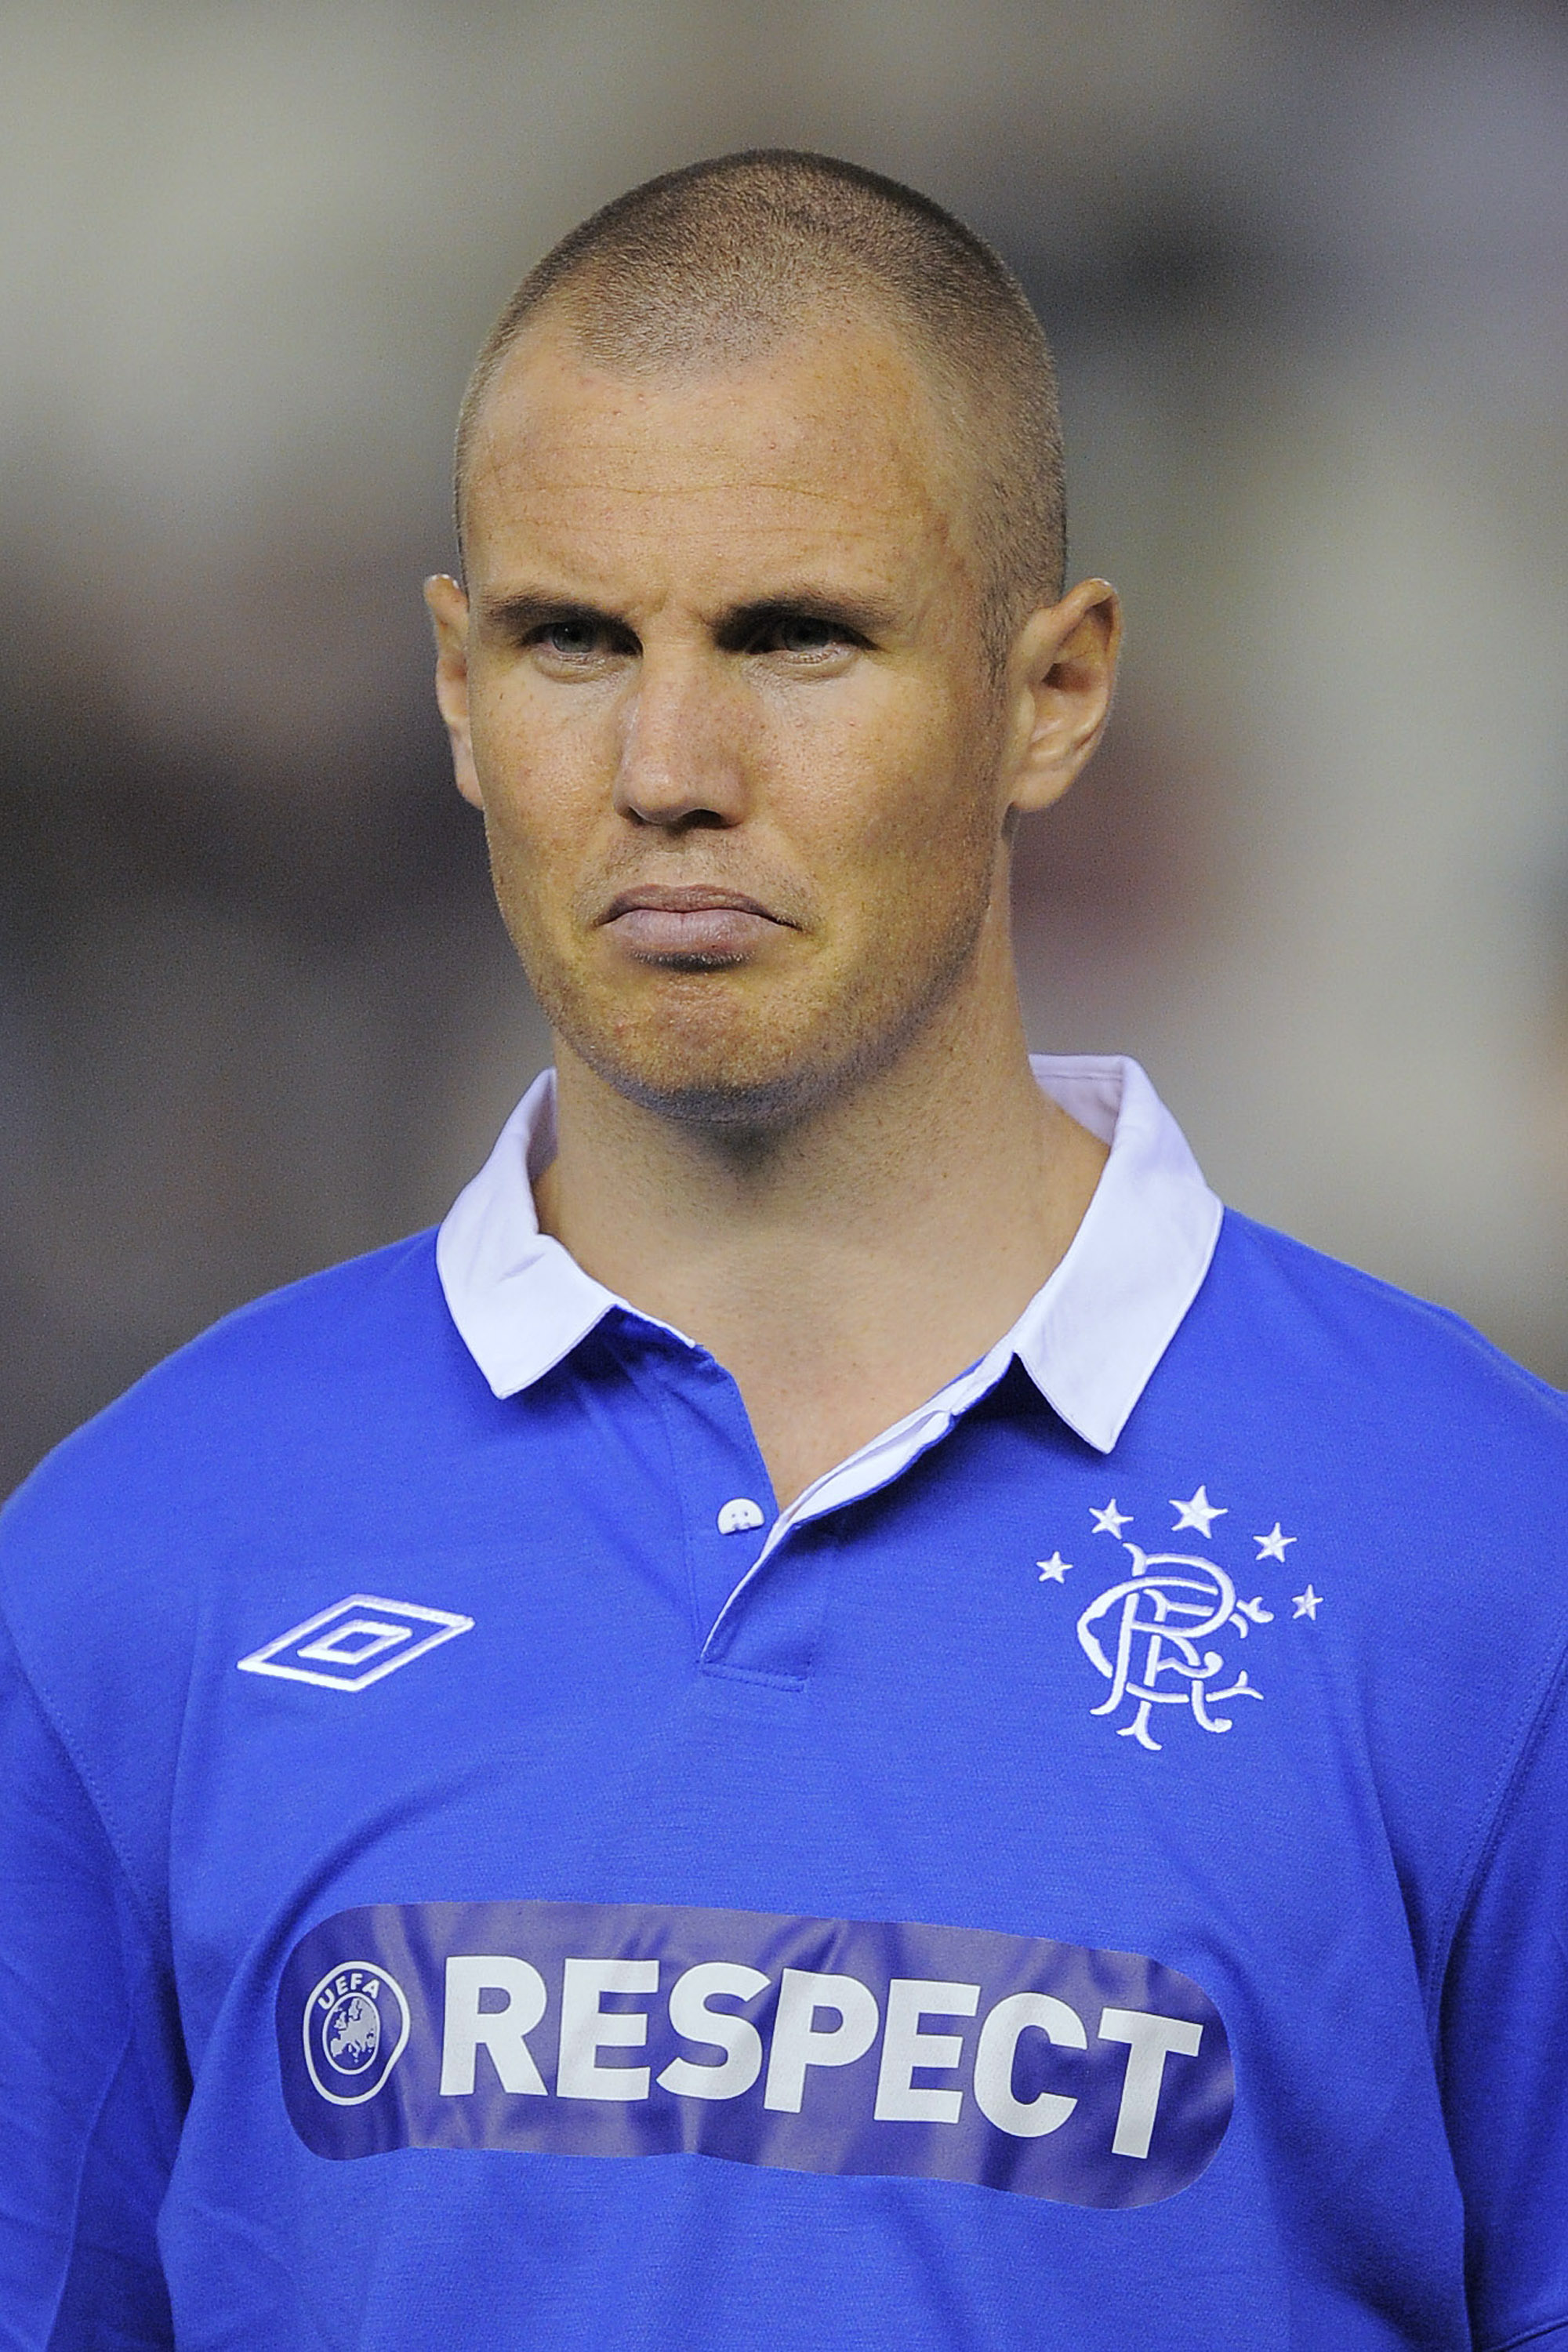 VALENCIA, SPAIN - NOVEMBER 02:  Kenny Miller of Glasgow Rangers looks on prior the UEFA Champions League group C match between Valencia CF and Glasgow Rangers at the Mestalla Stadium on November 2, 2010 in Valencia, Spain. Valencia won the match 3-0.  (Ph